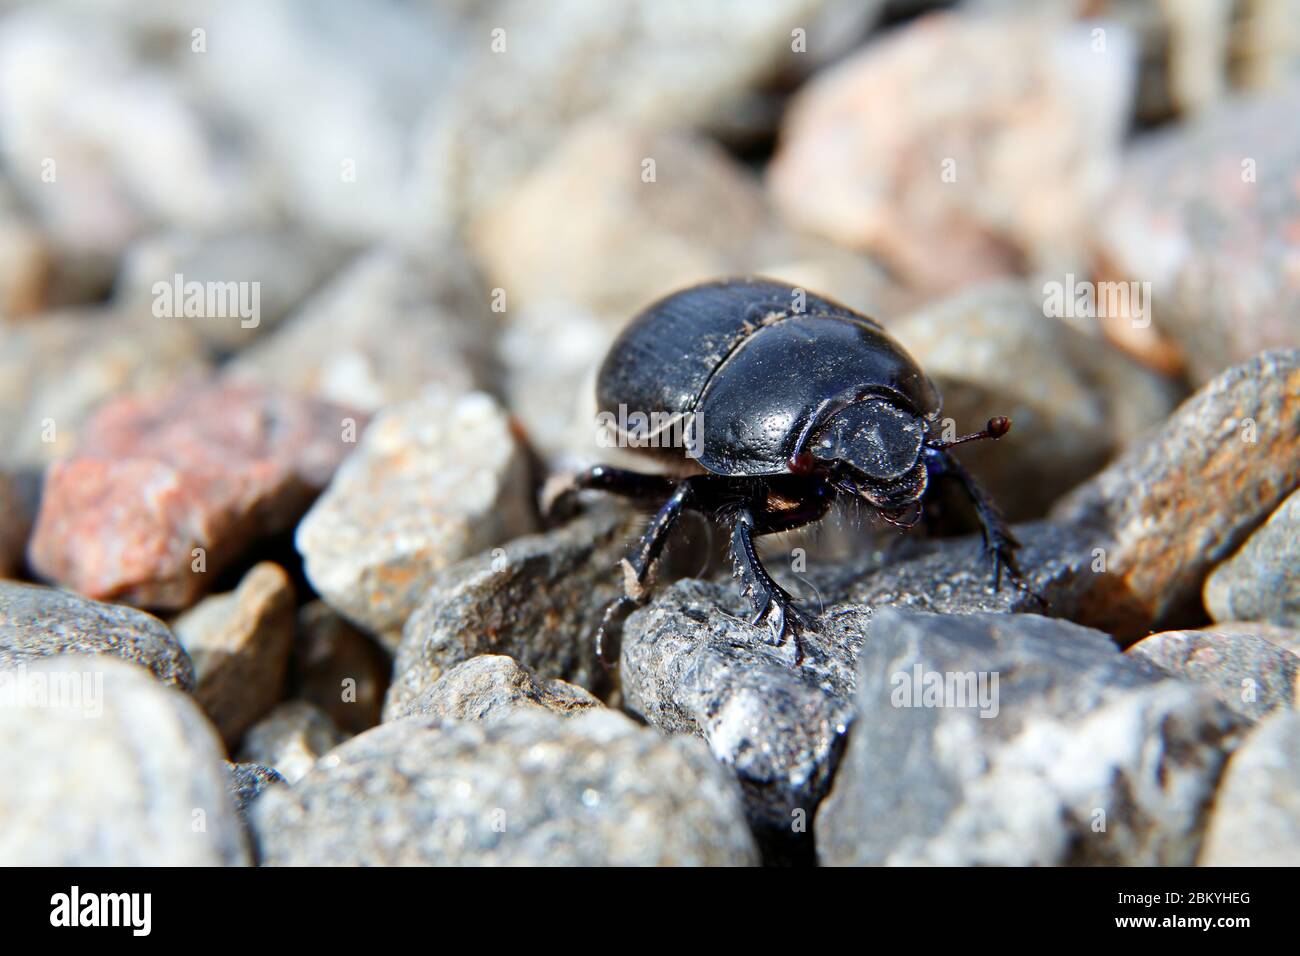 A dung beetle crawling over small grey stones in sunlight Stock Photo